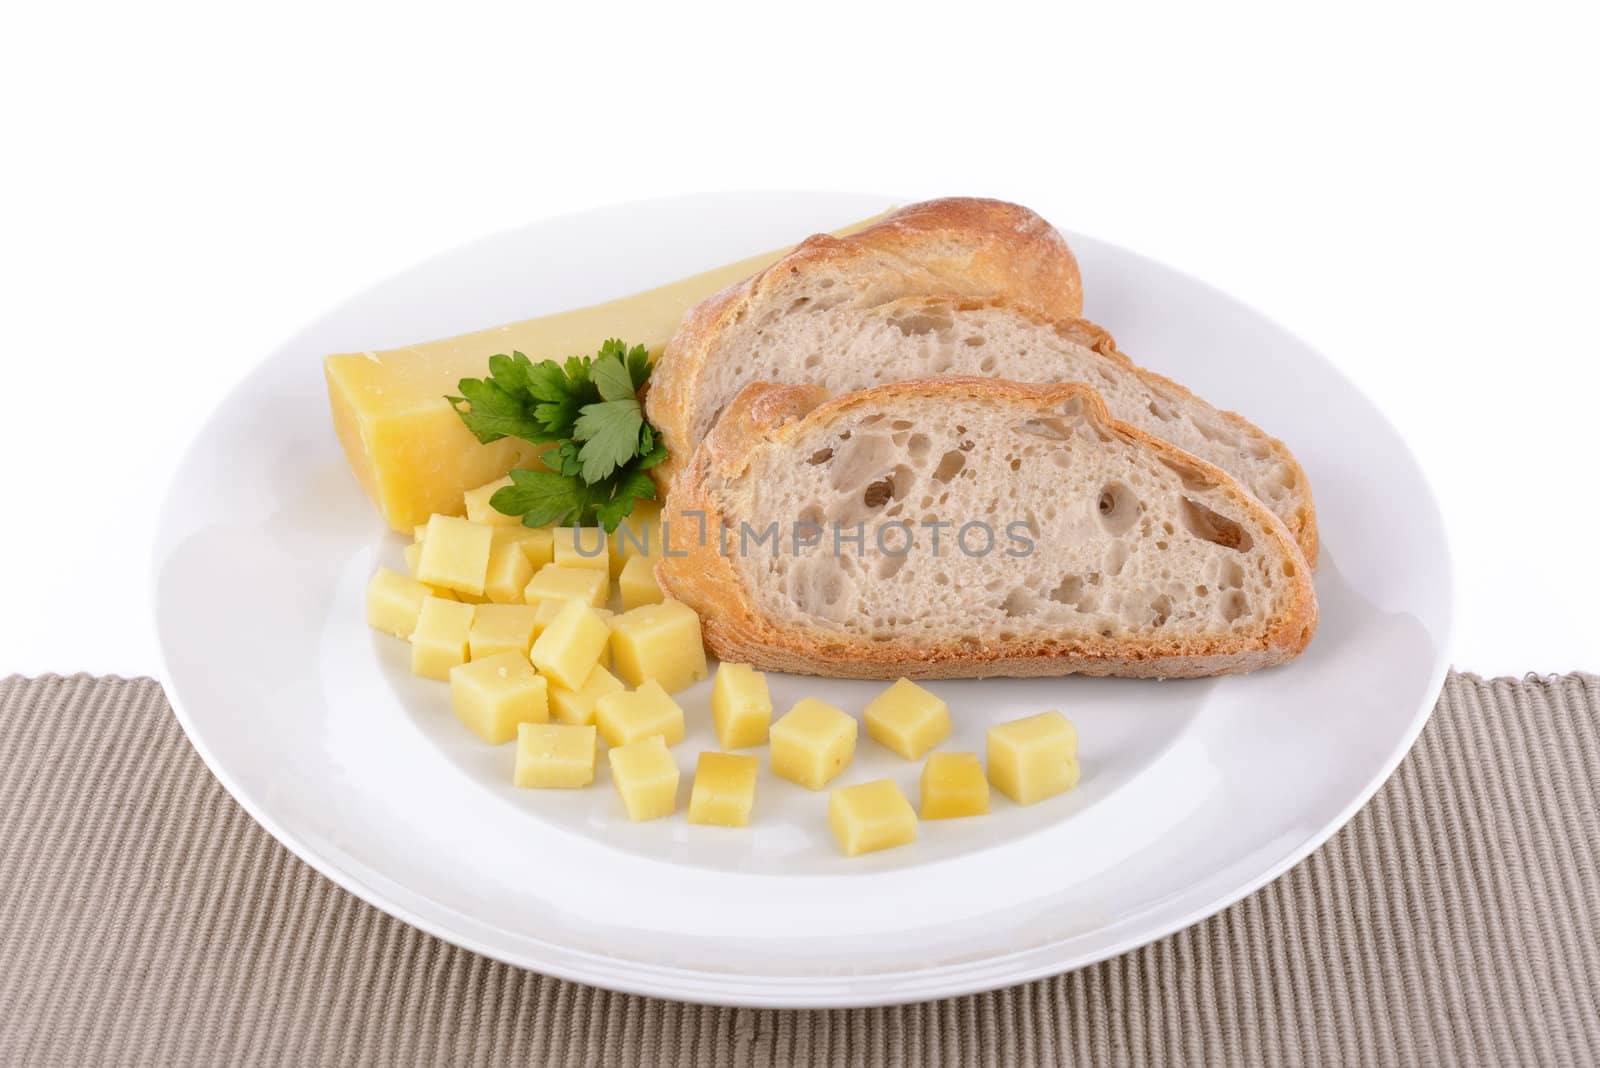 Bread and chesse on dish.